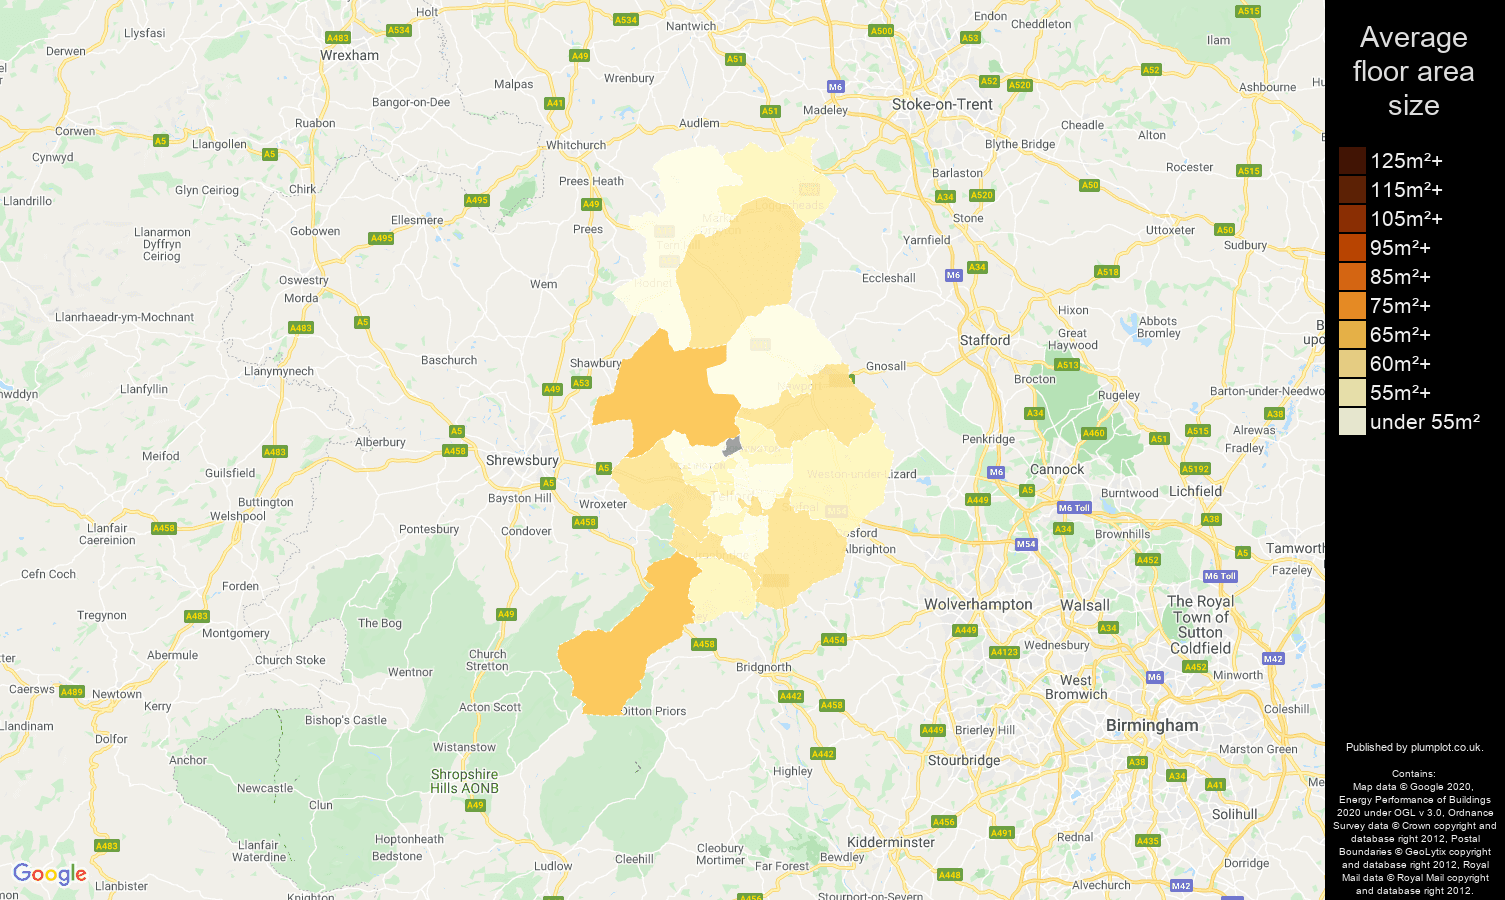 Telford map of average floor area size of flats